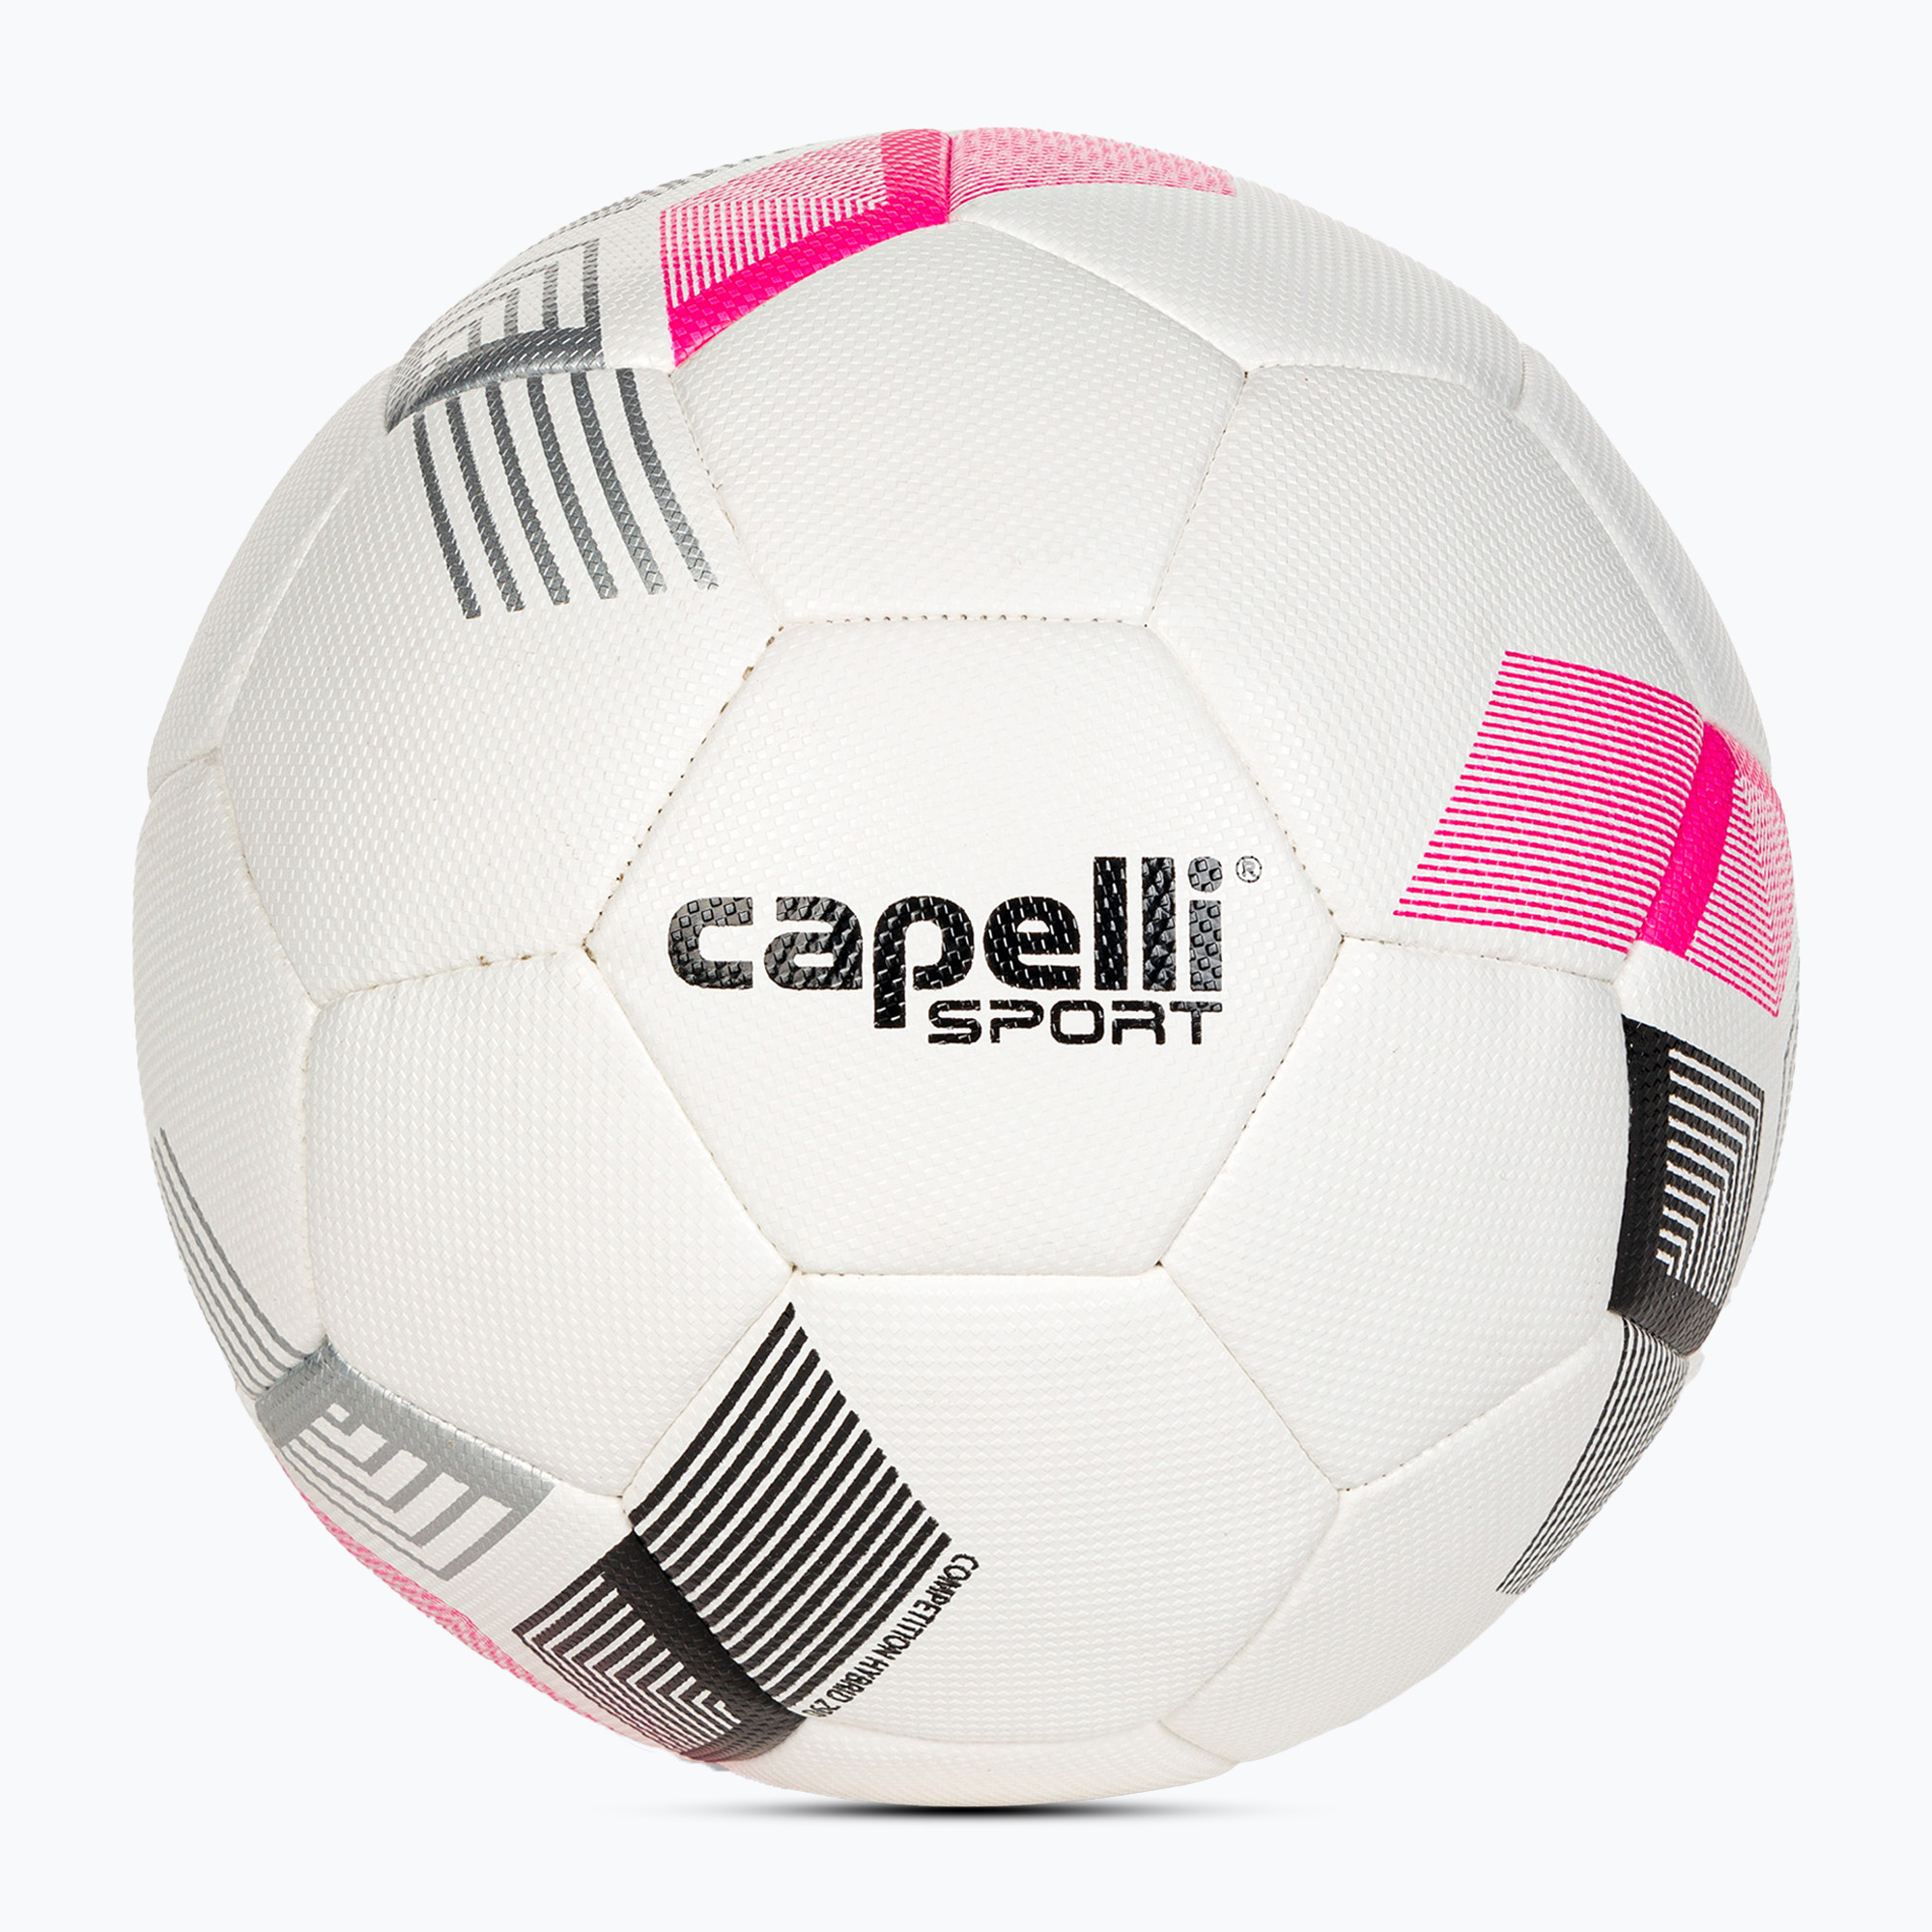 Capelli Tribeca Metro Competition Hybrid Football AGE-5881 размер 3